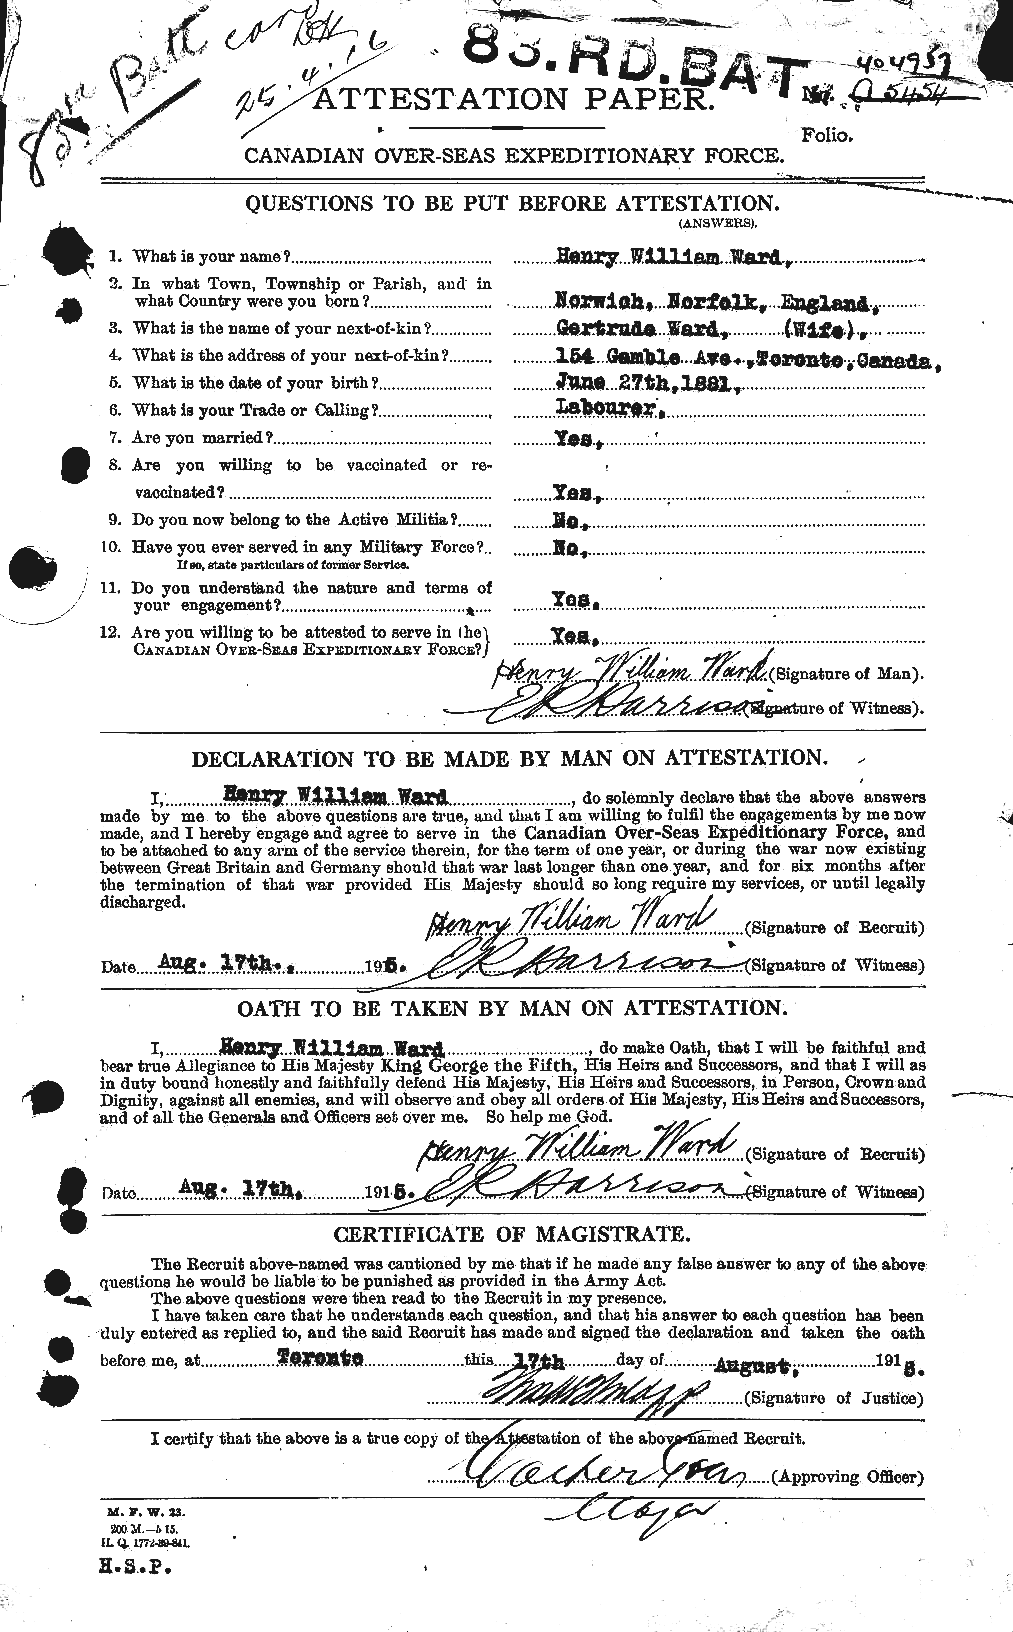 Personnel Records of the First World War - CEF 657846a